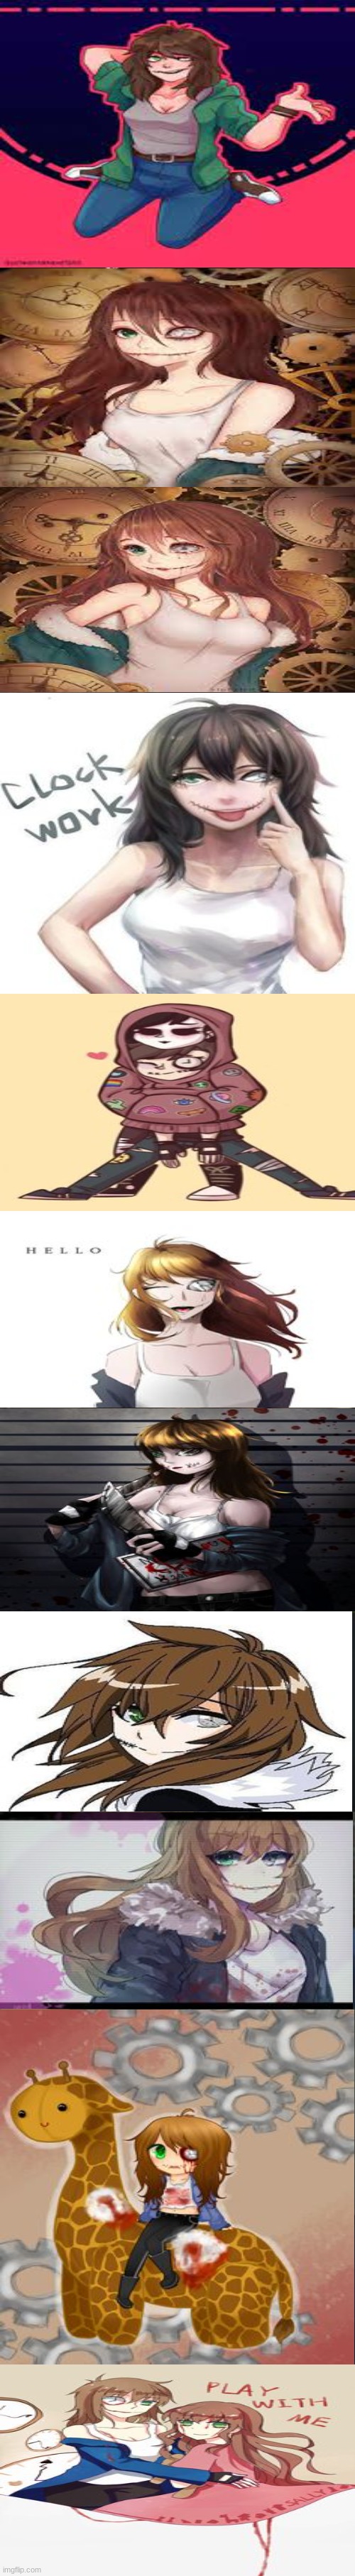 why do i have a crush on her shes just to cute nkjveivbhewfbcji23rfij | image tagged in creepypasta | made w/ Imgflip meme maker